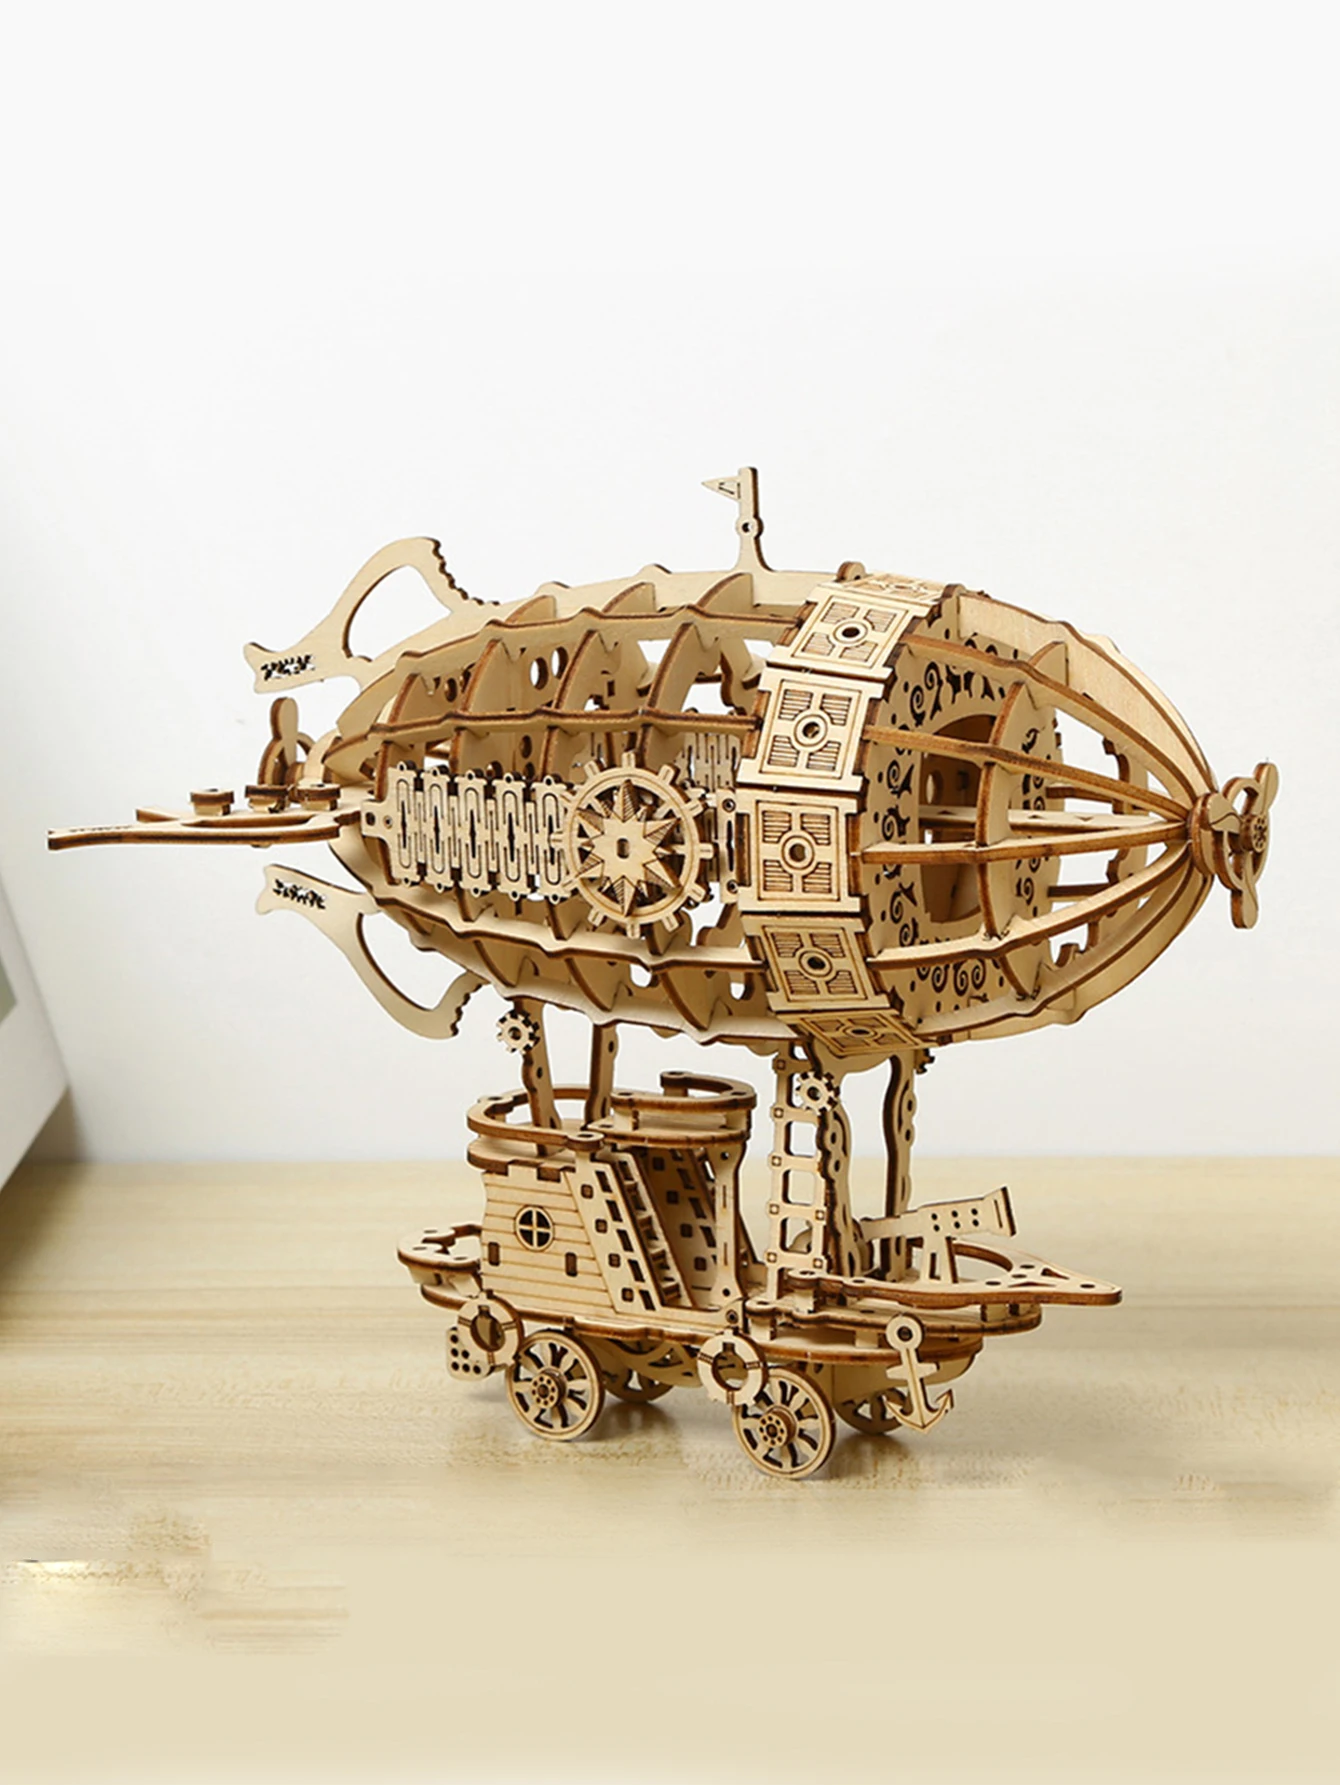 3D Wooden Puzzle Airship Model kits for Adults Model Building Kit  Brain Teaser for Adults to Build Hand Craft Mechanical